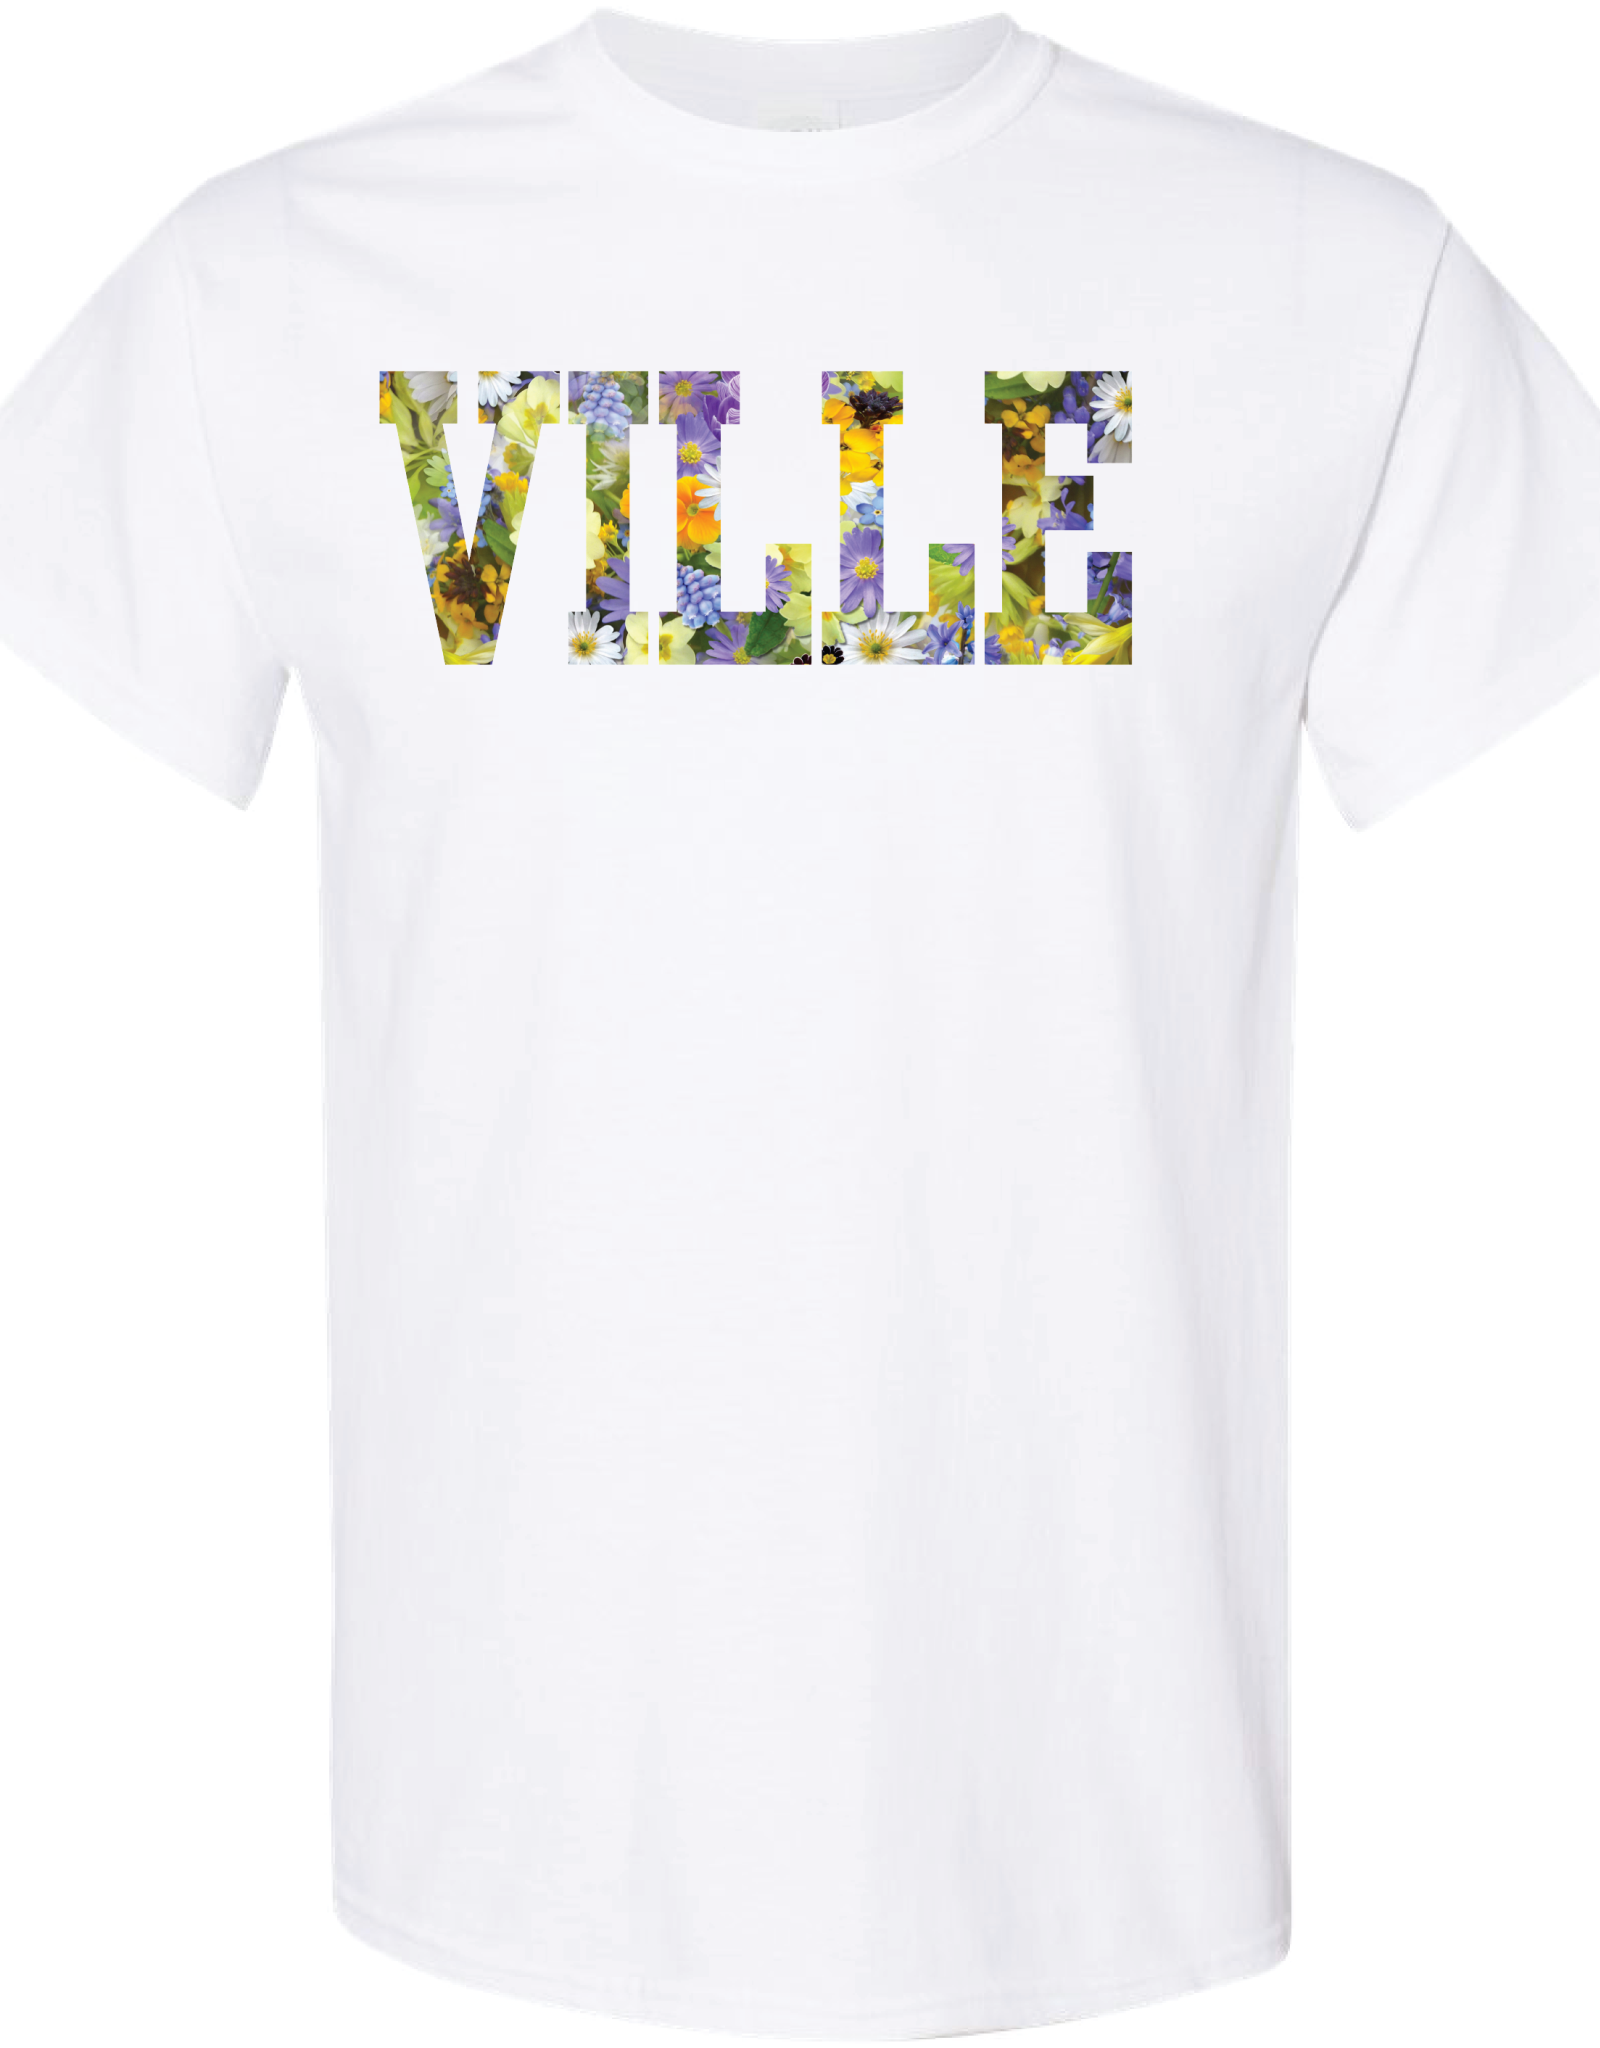 Ville Floral Tee White